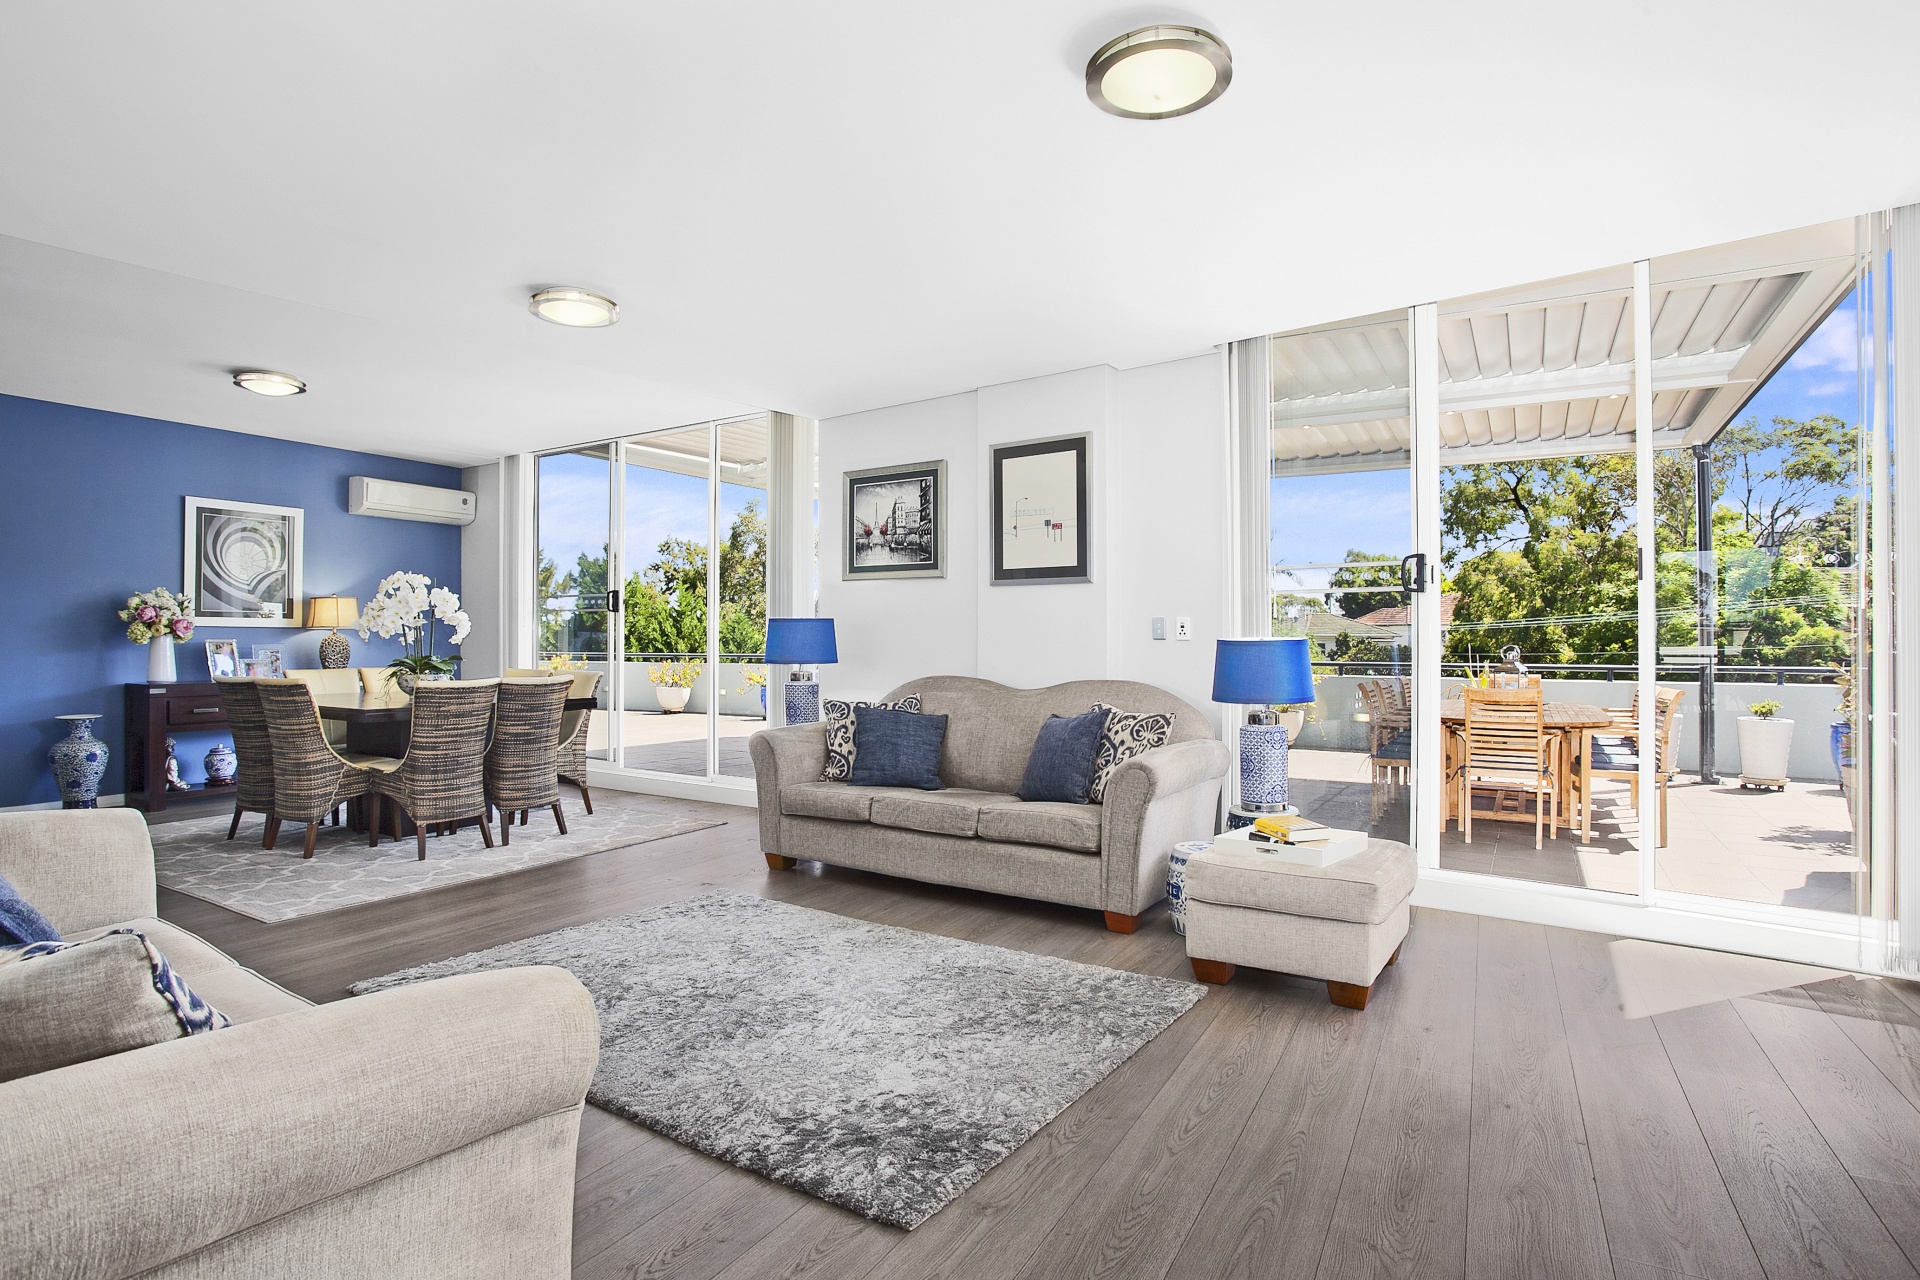 3 Bedrooms, Apartment, Sold , Mercer Street, 2 Bathrooms, Listing ID 1129, Castle Hill, NSW, Australia,